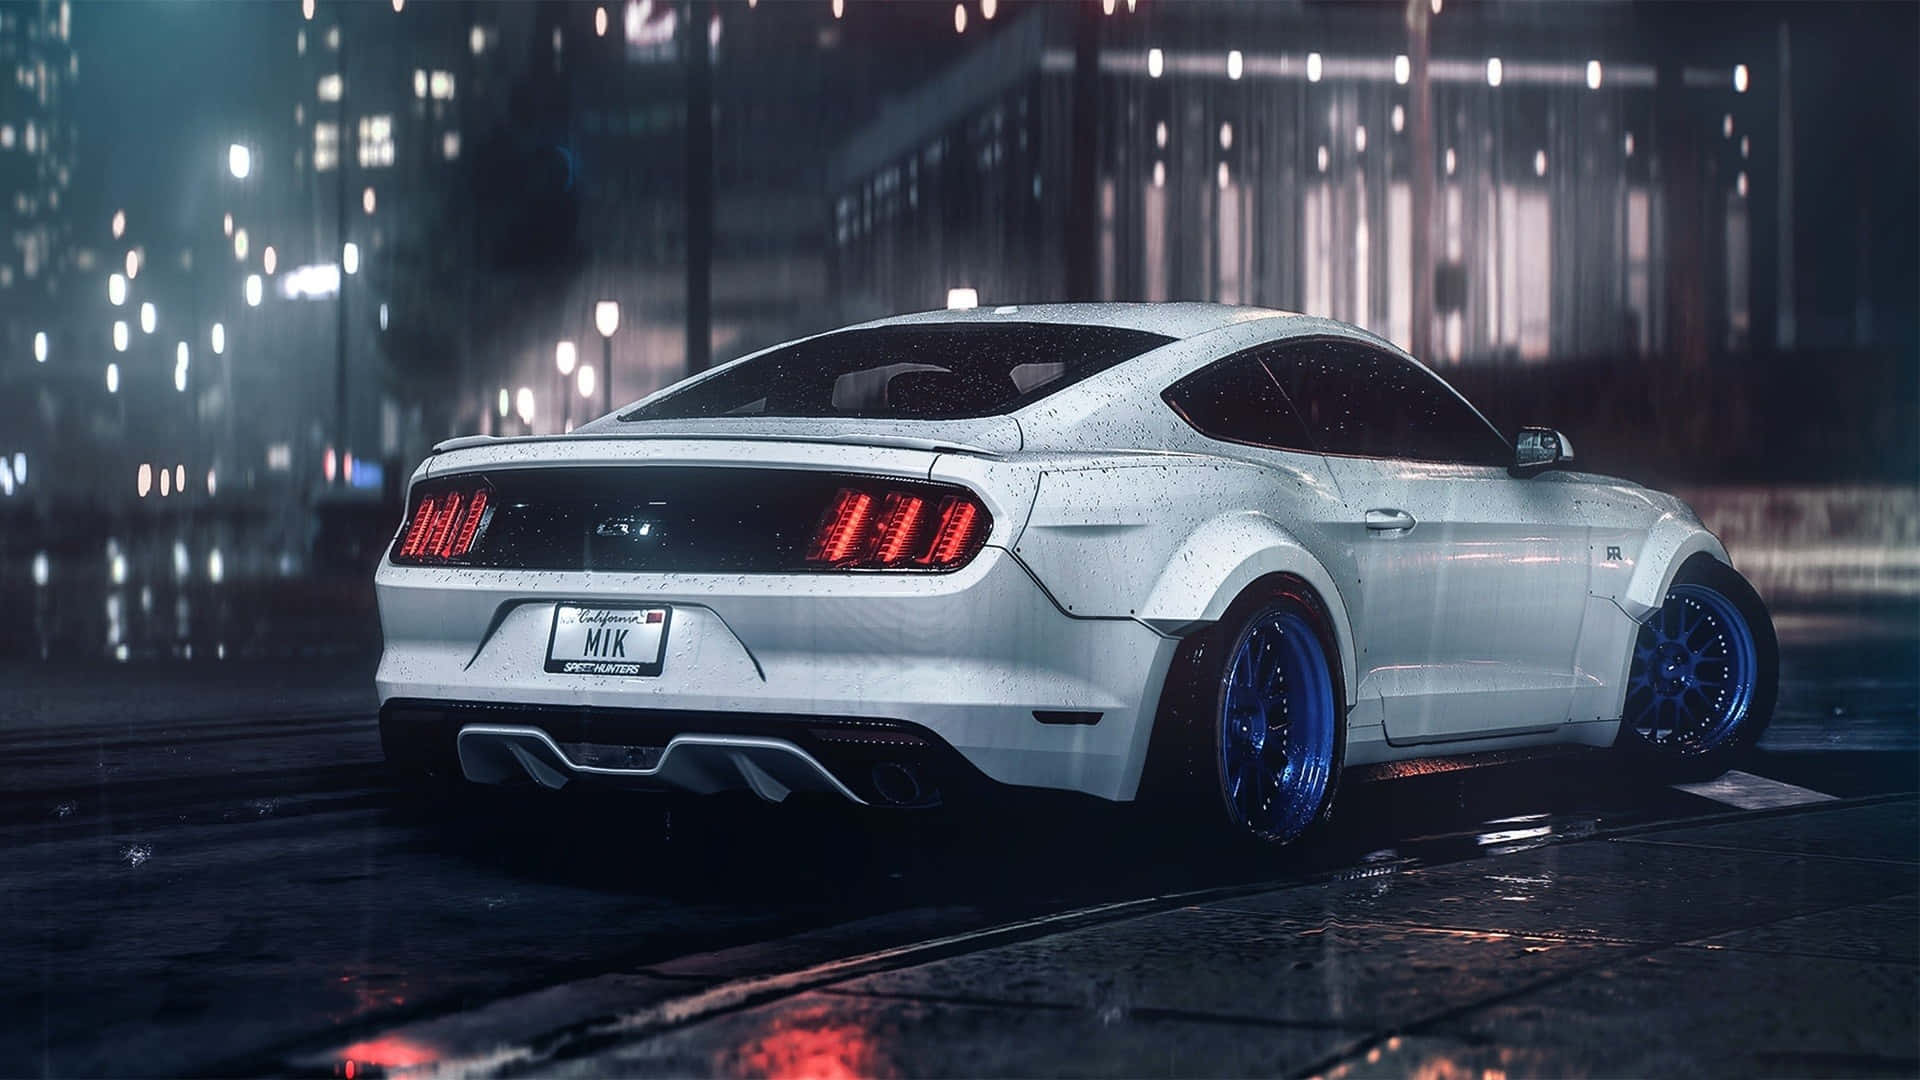 Ford Mustang Rtr In The Rain Wallpaper